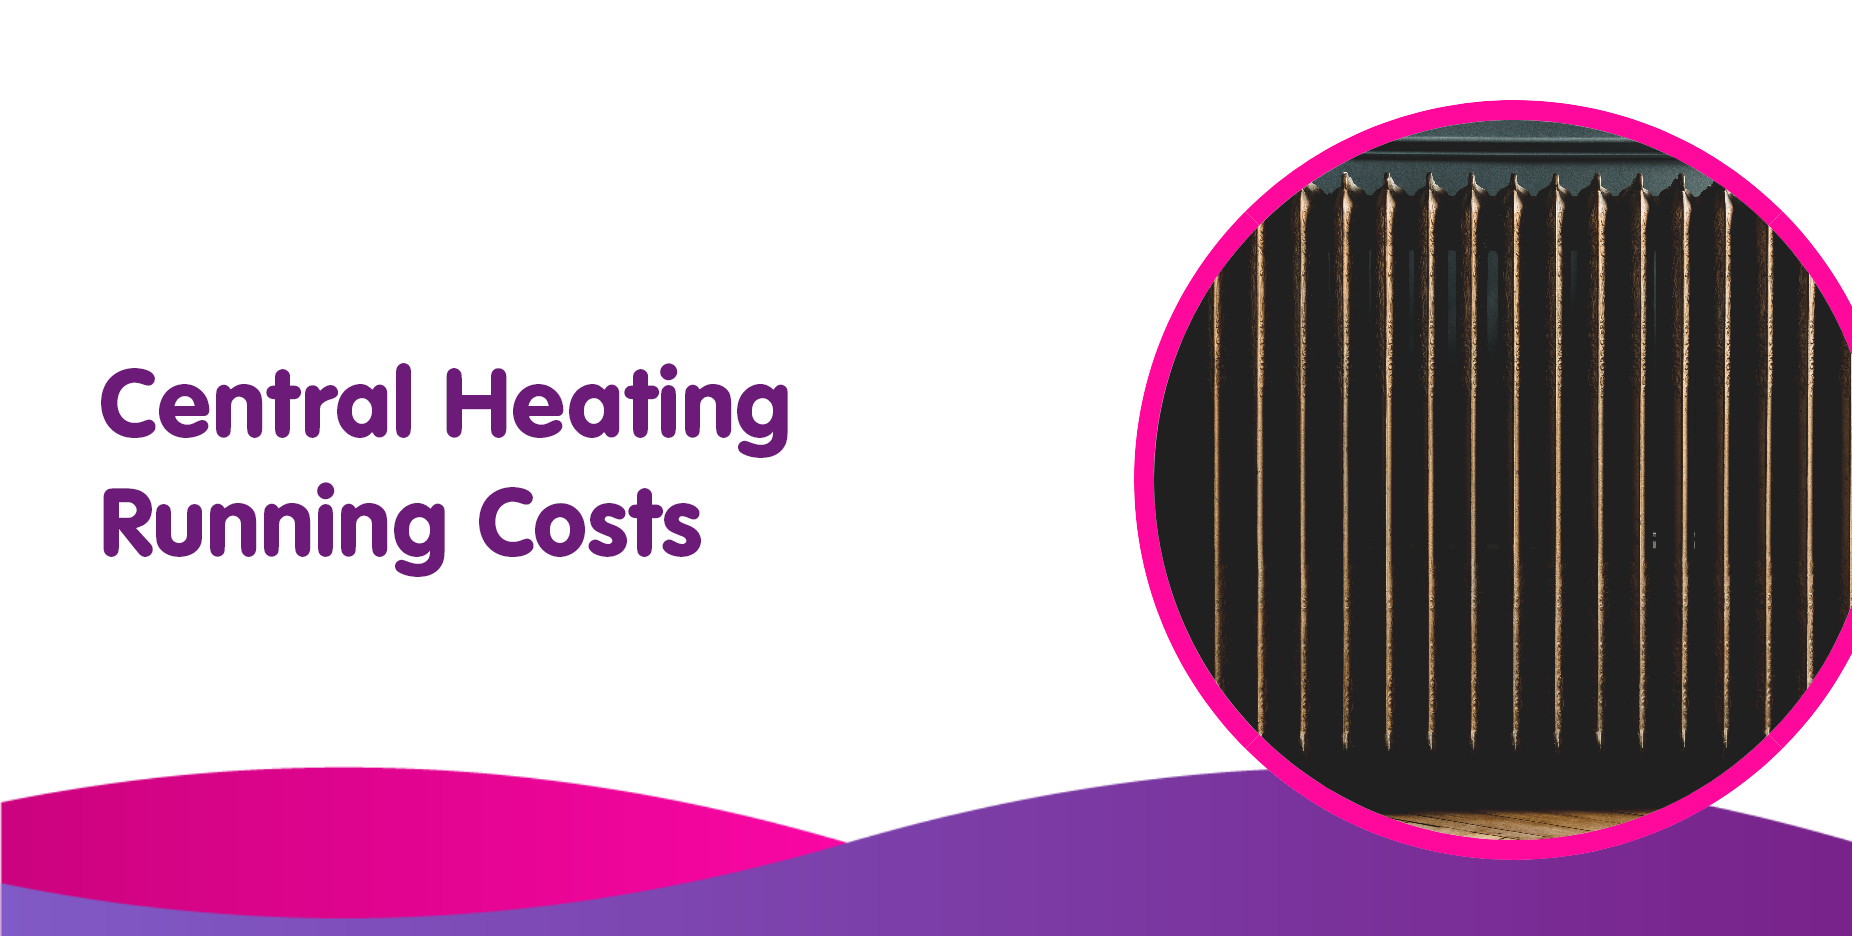 How Much Does It Cost To Run Central Heating per Hour & Save Money?